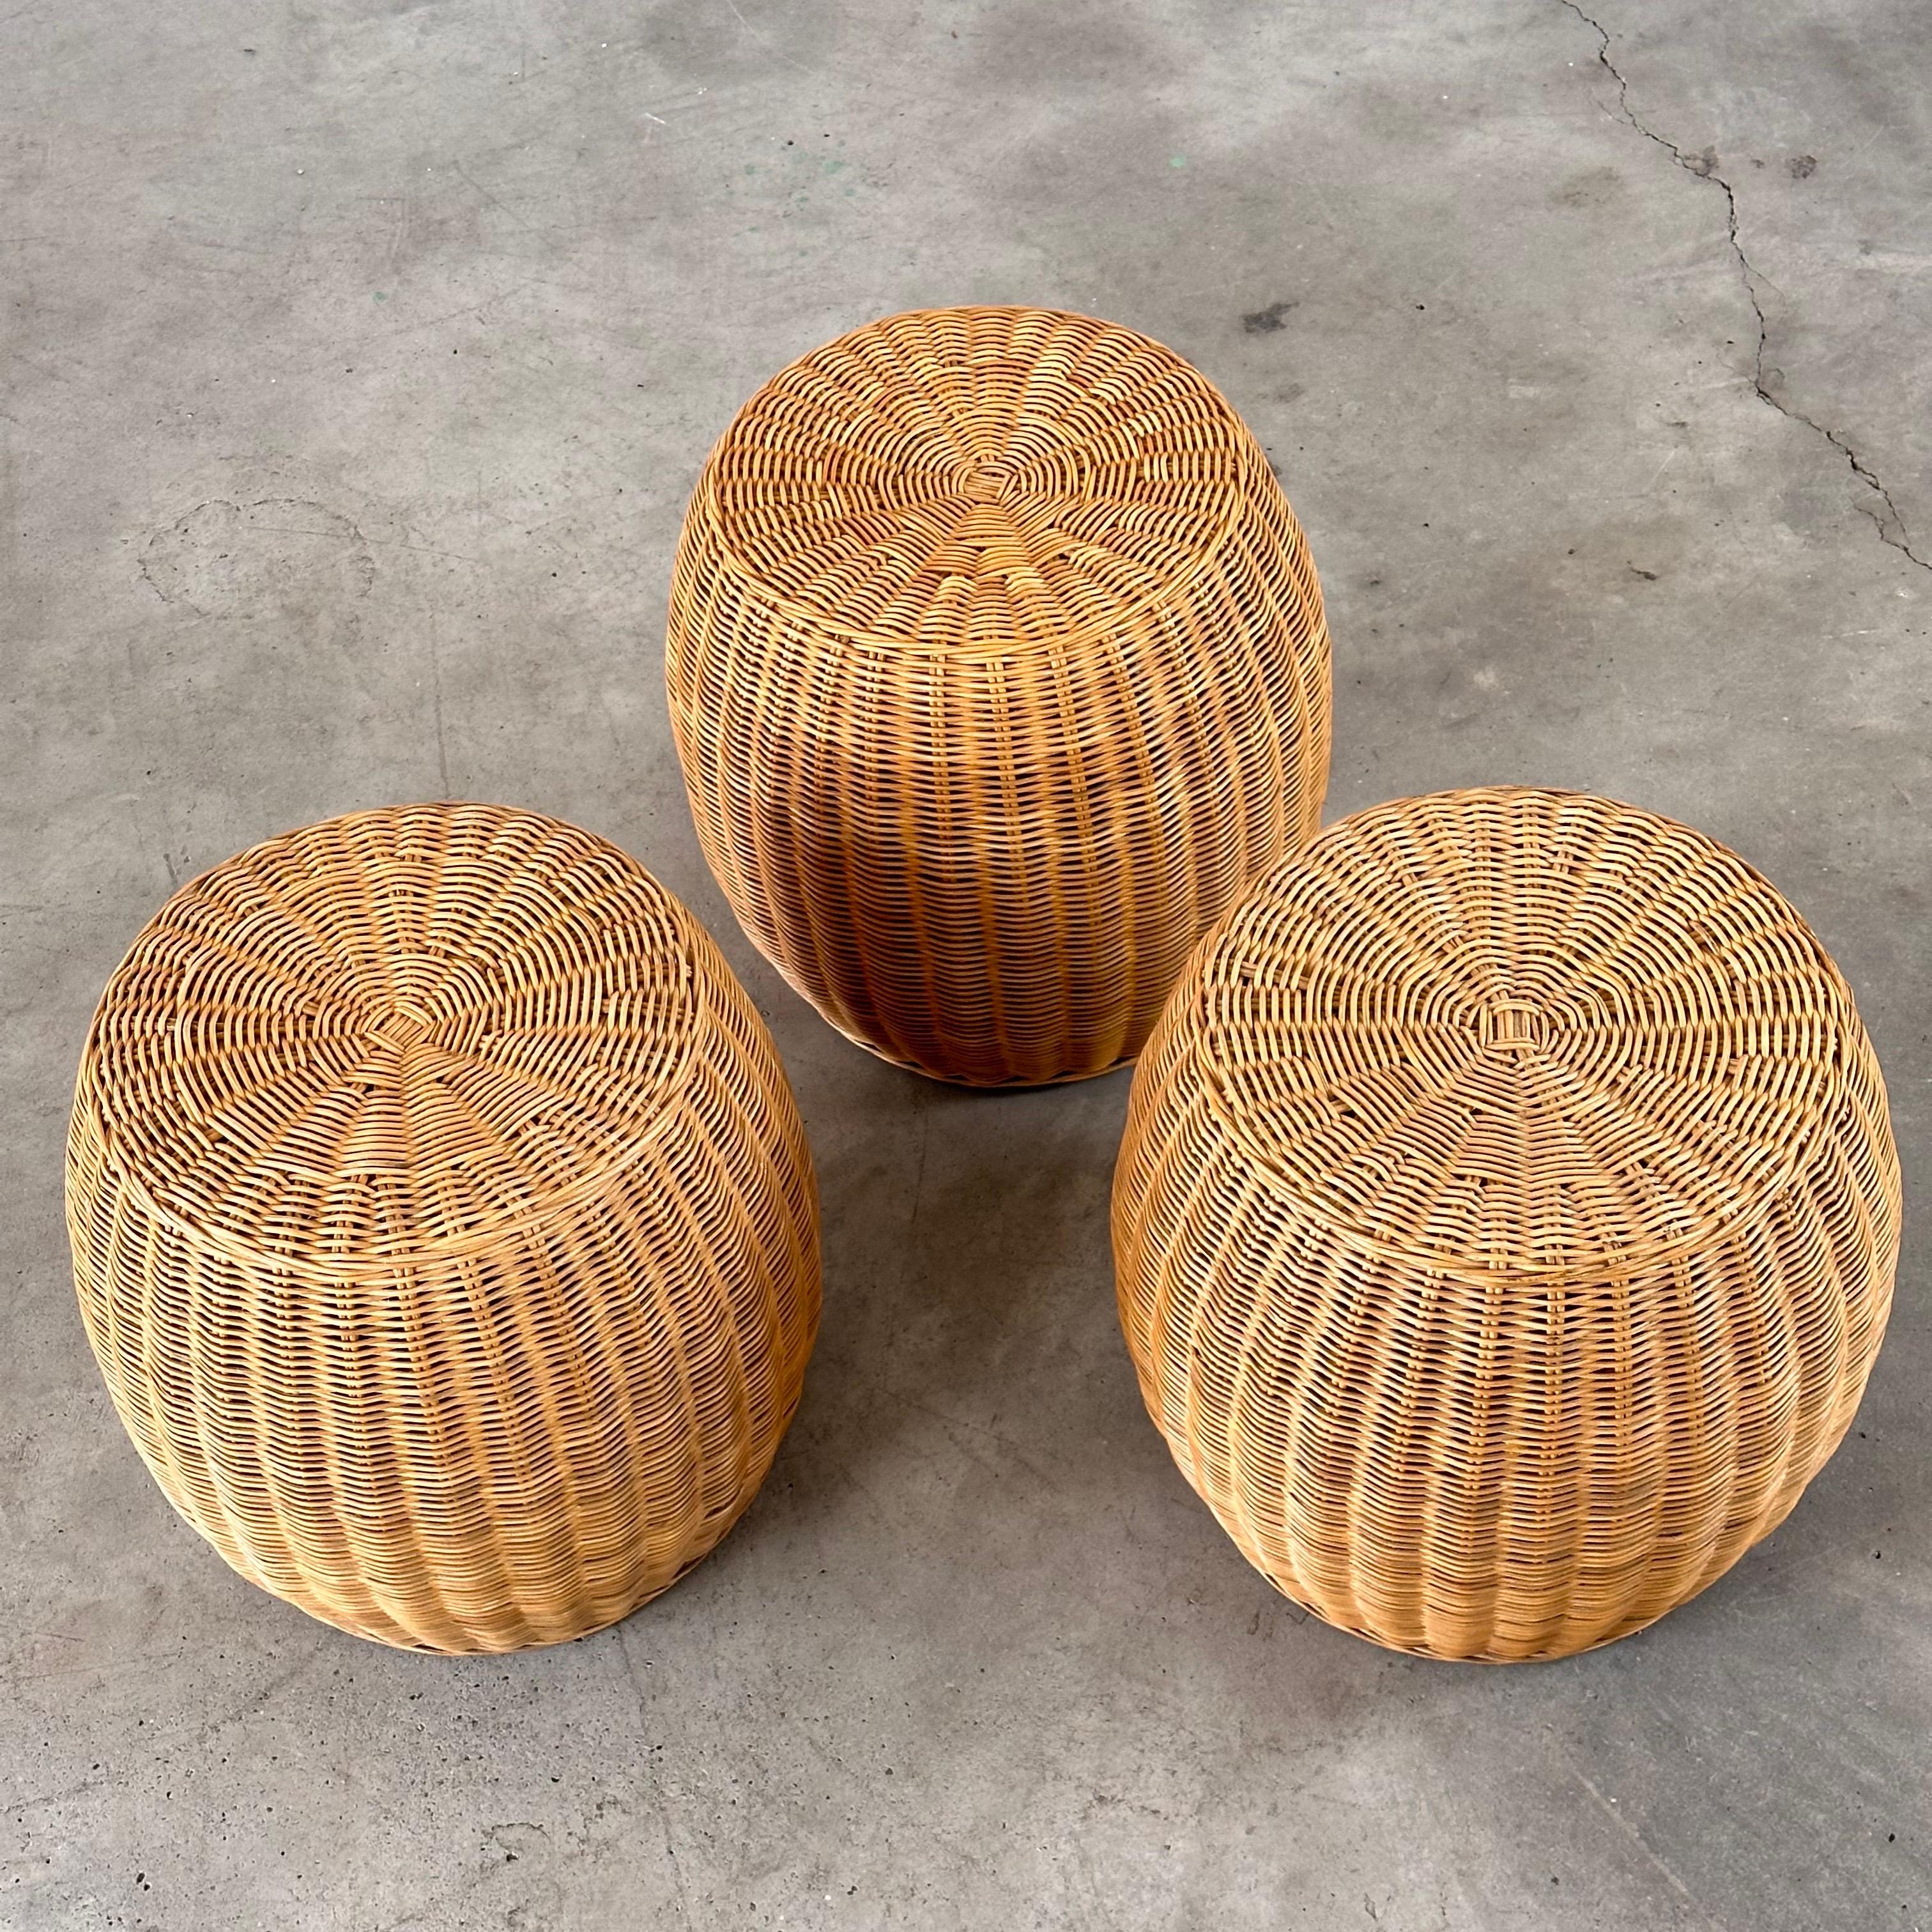 Exquisite Set of Three Wicker Ottoman Poufs, Italy, 1980s For Sale 2